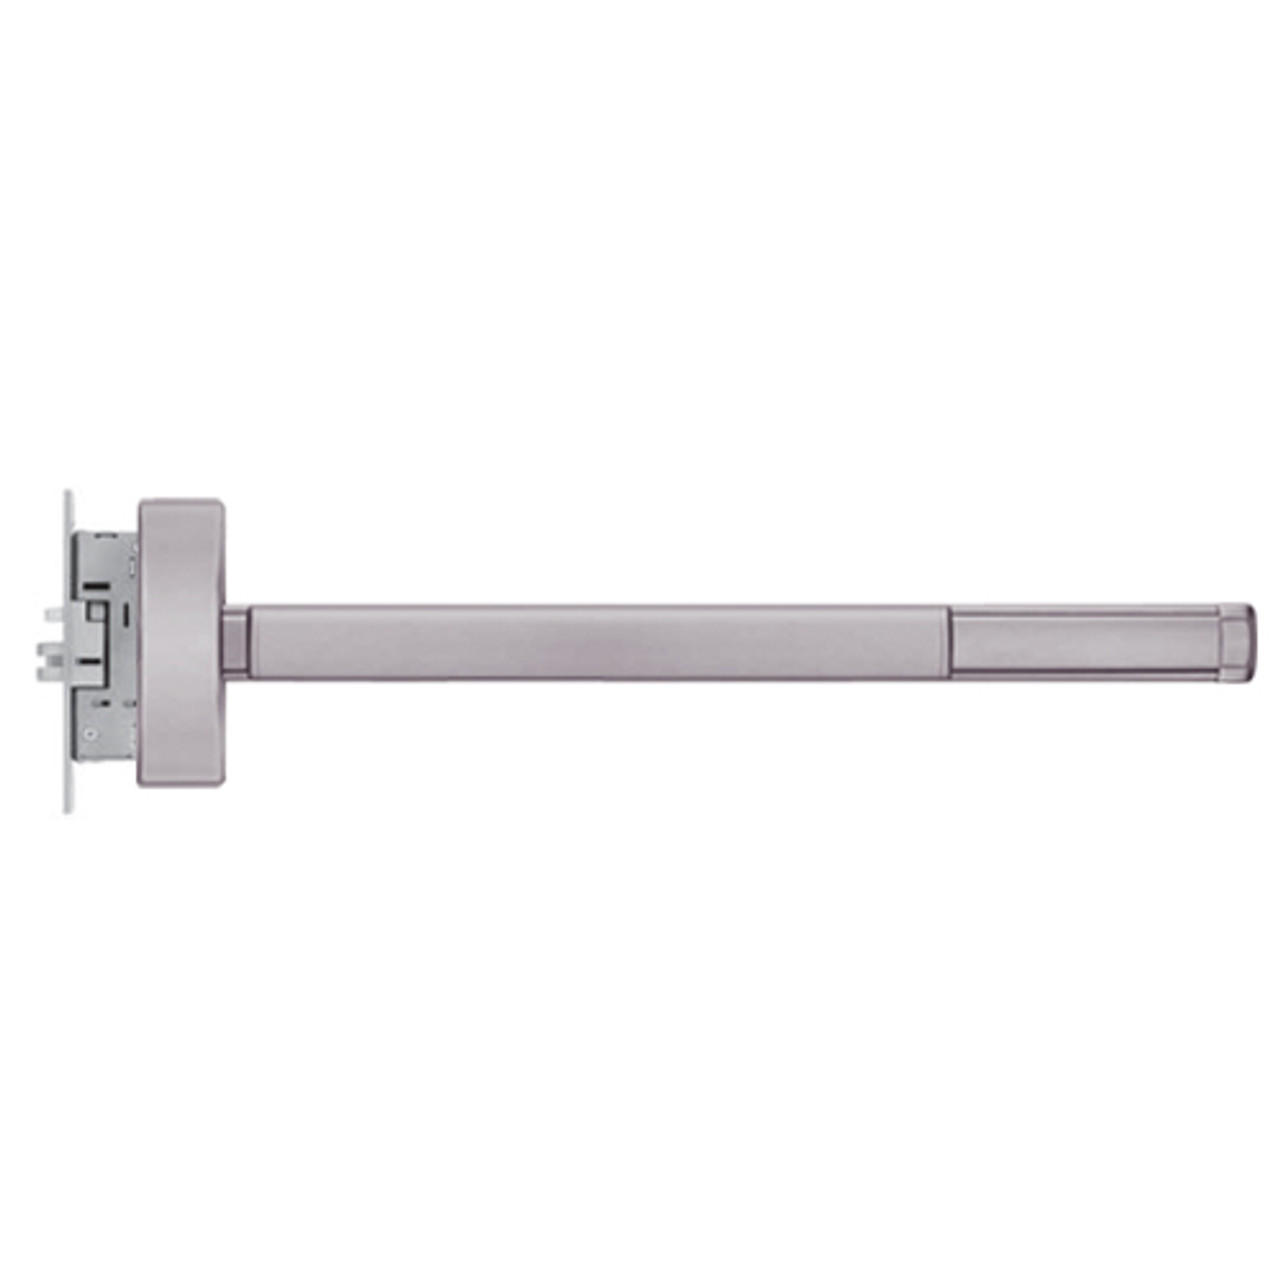 MLR2303-RHR-630-36 PHI 2300 Series Apex Mortise Exit Device with Motorized Latch Retraction Prepped for Key Retracts Latchbolt in Satin Stainless Steel Finish